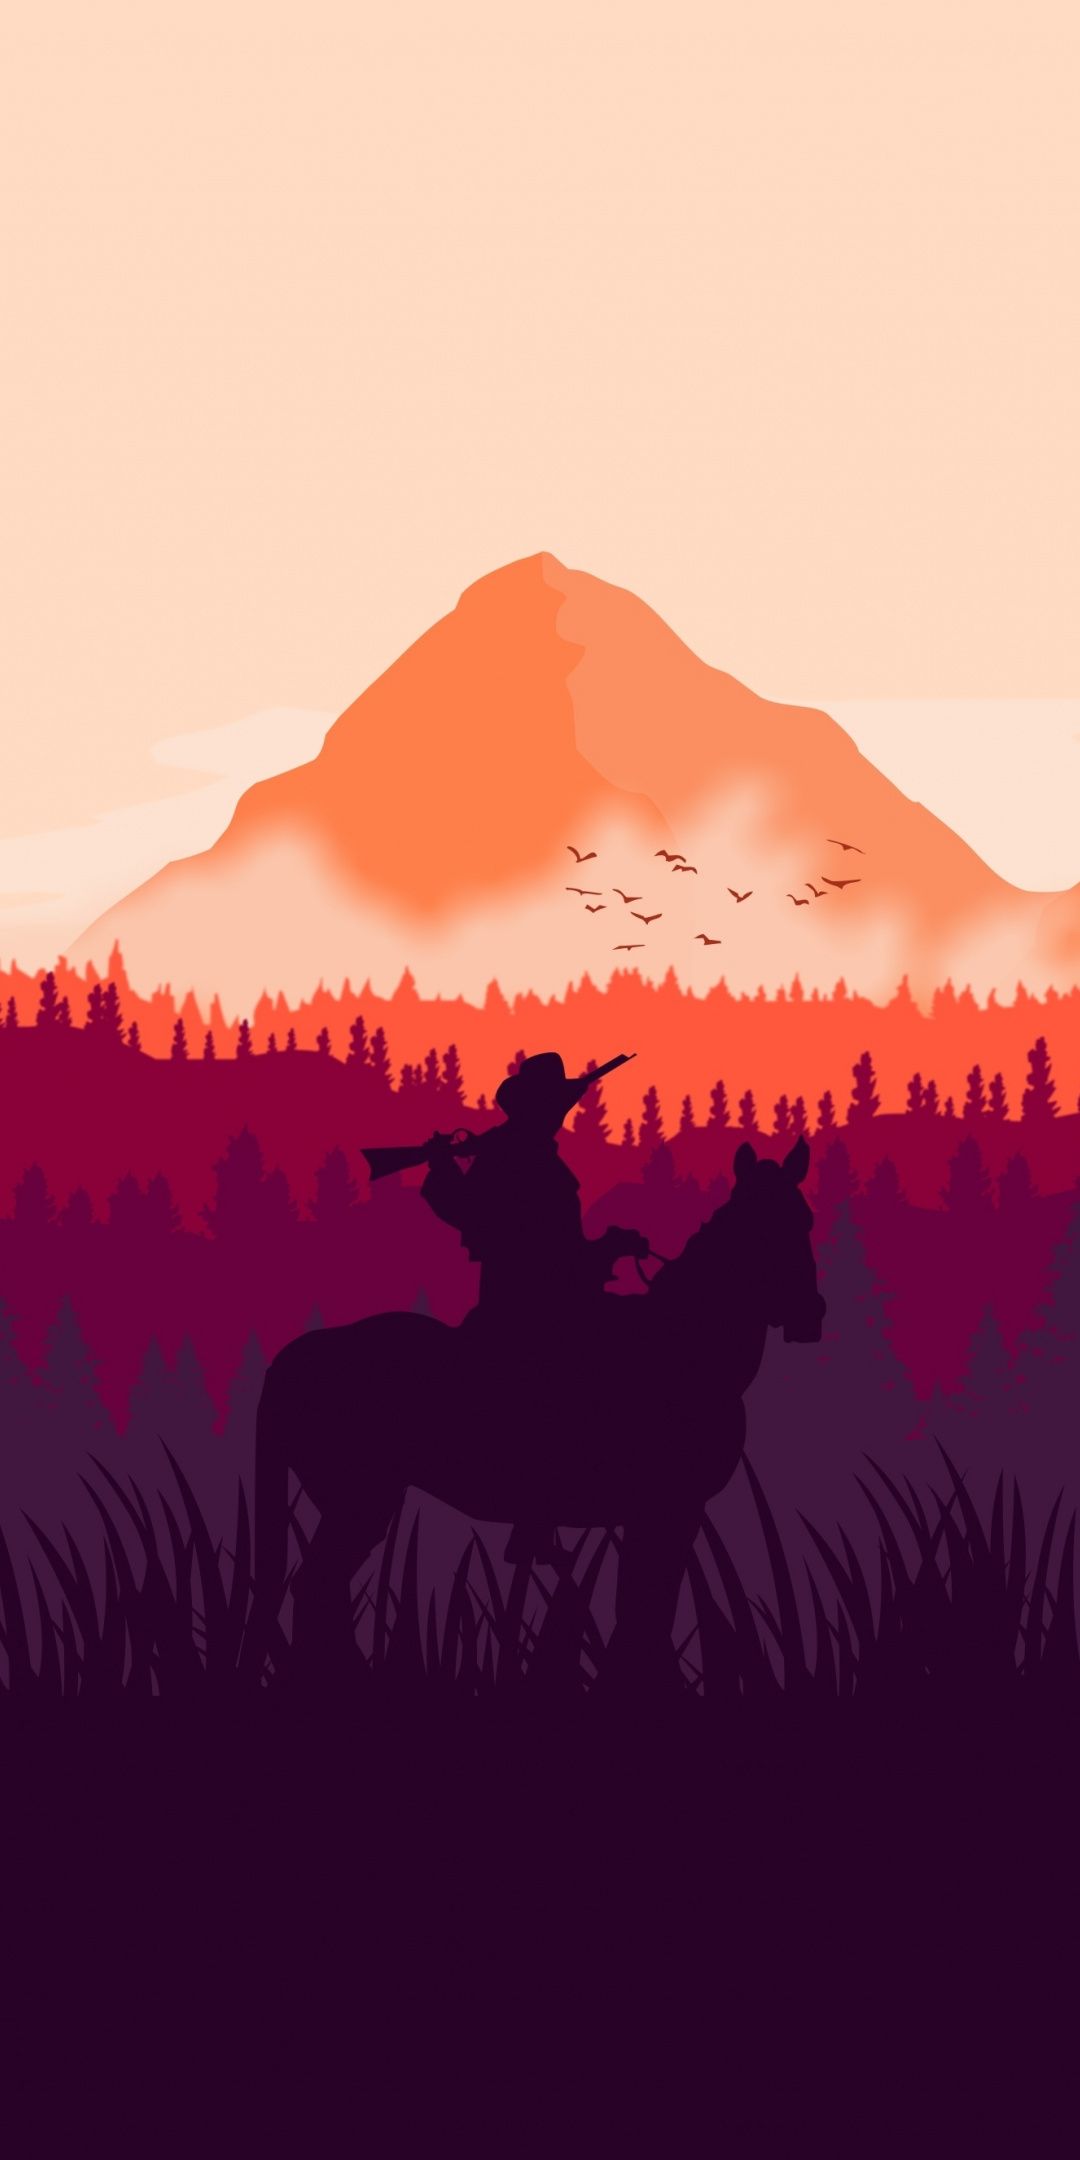 Red Dead Iphone Wallpapers